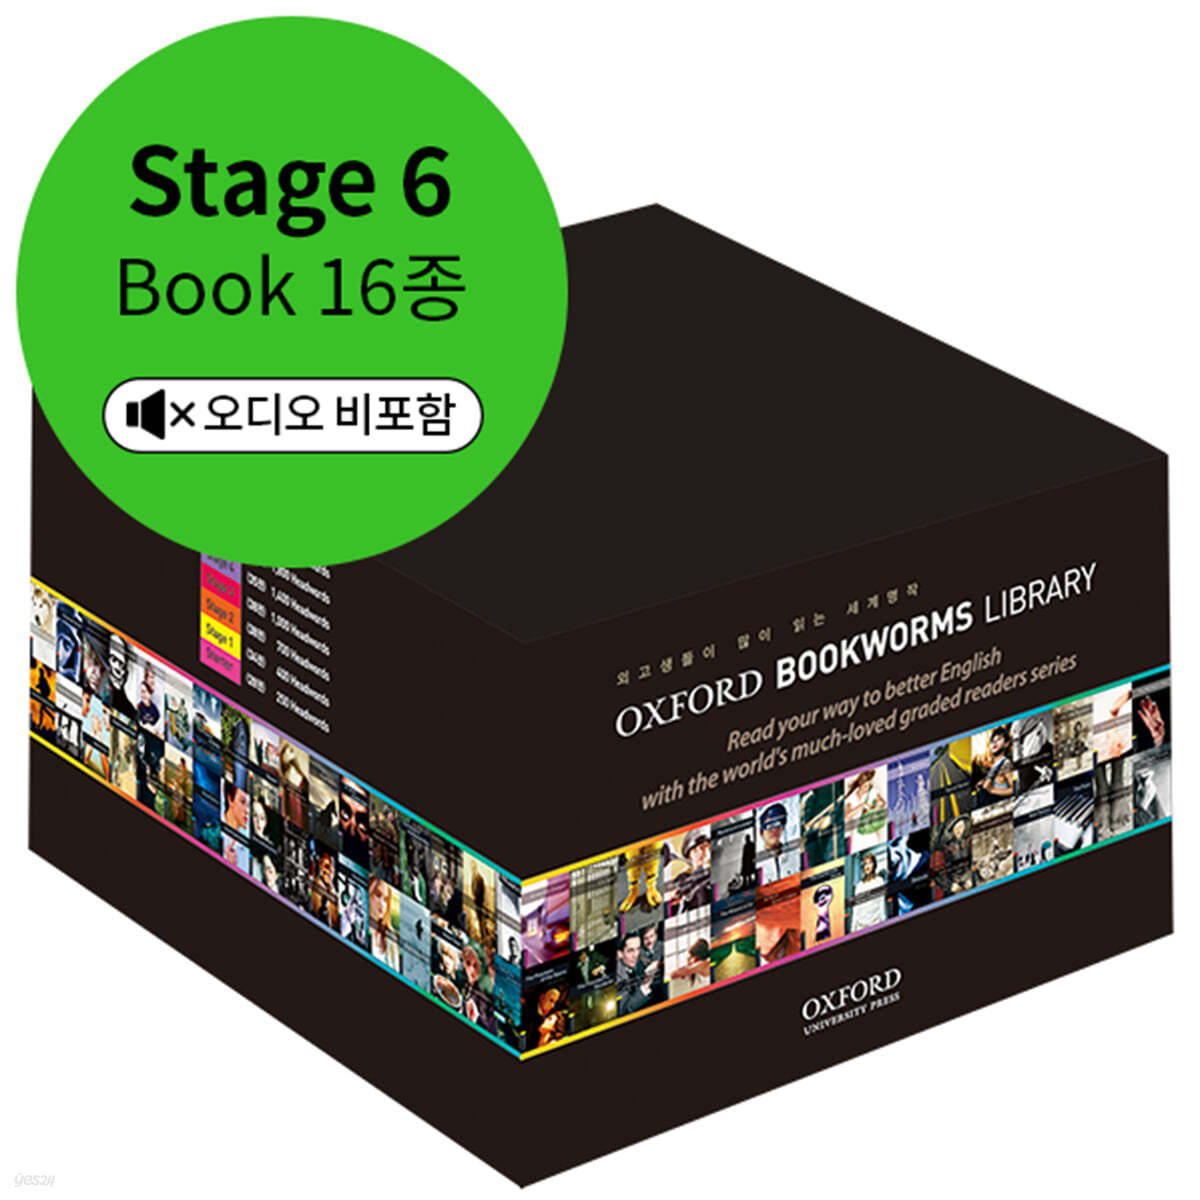 Oxford Bookworms Library Stage 6 Pack (16종) 